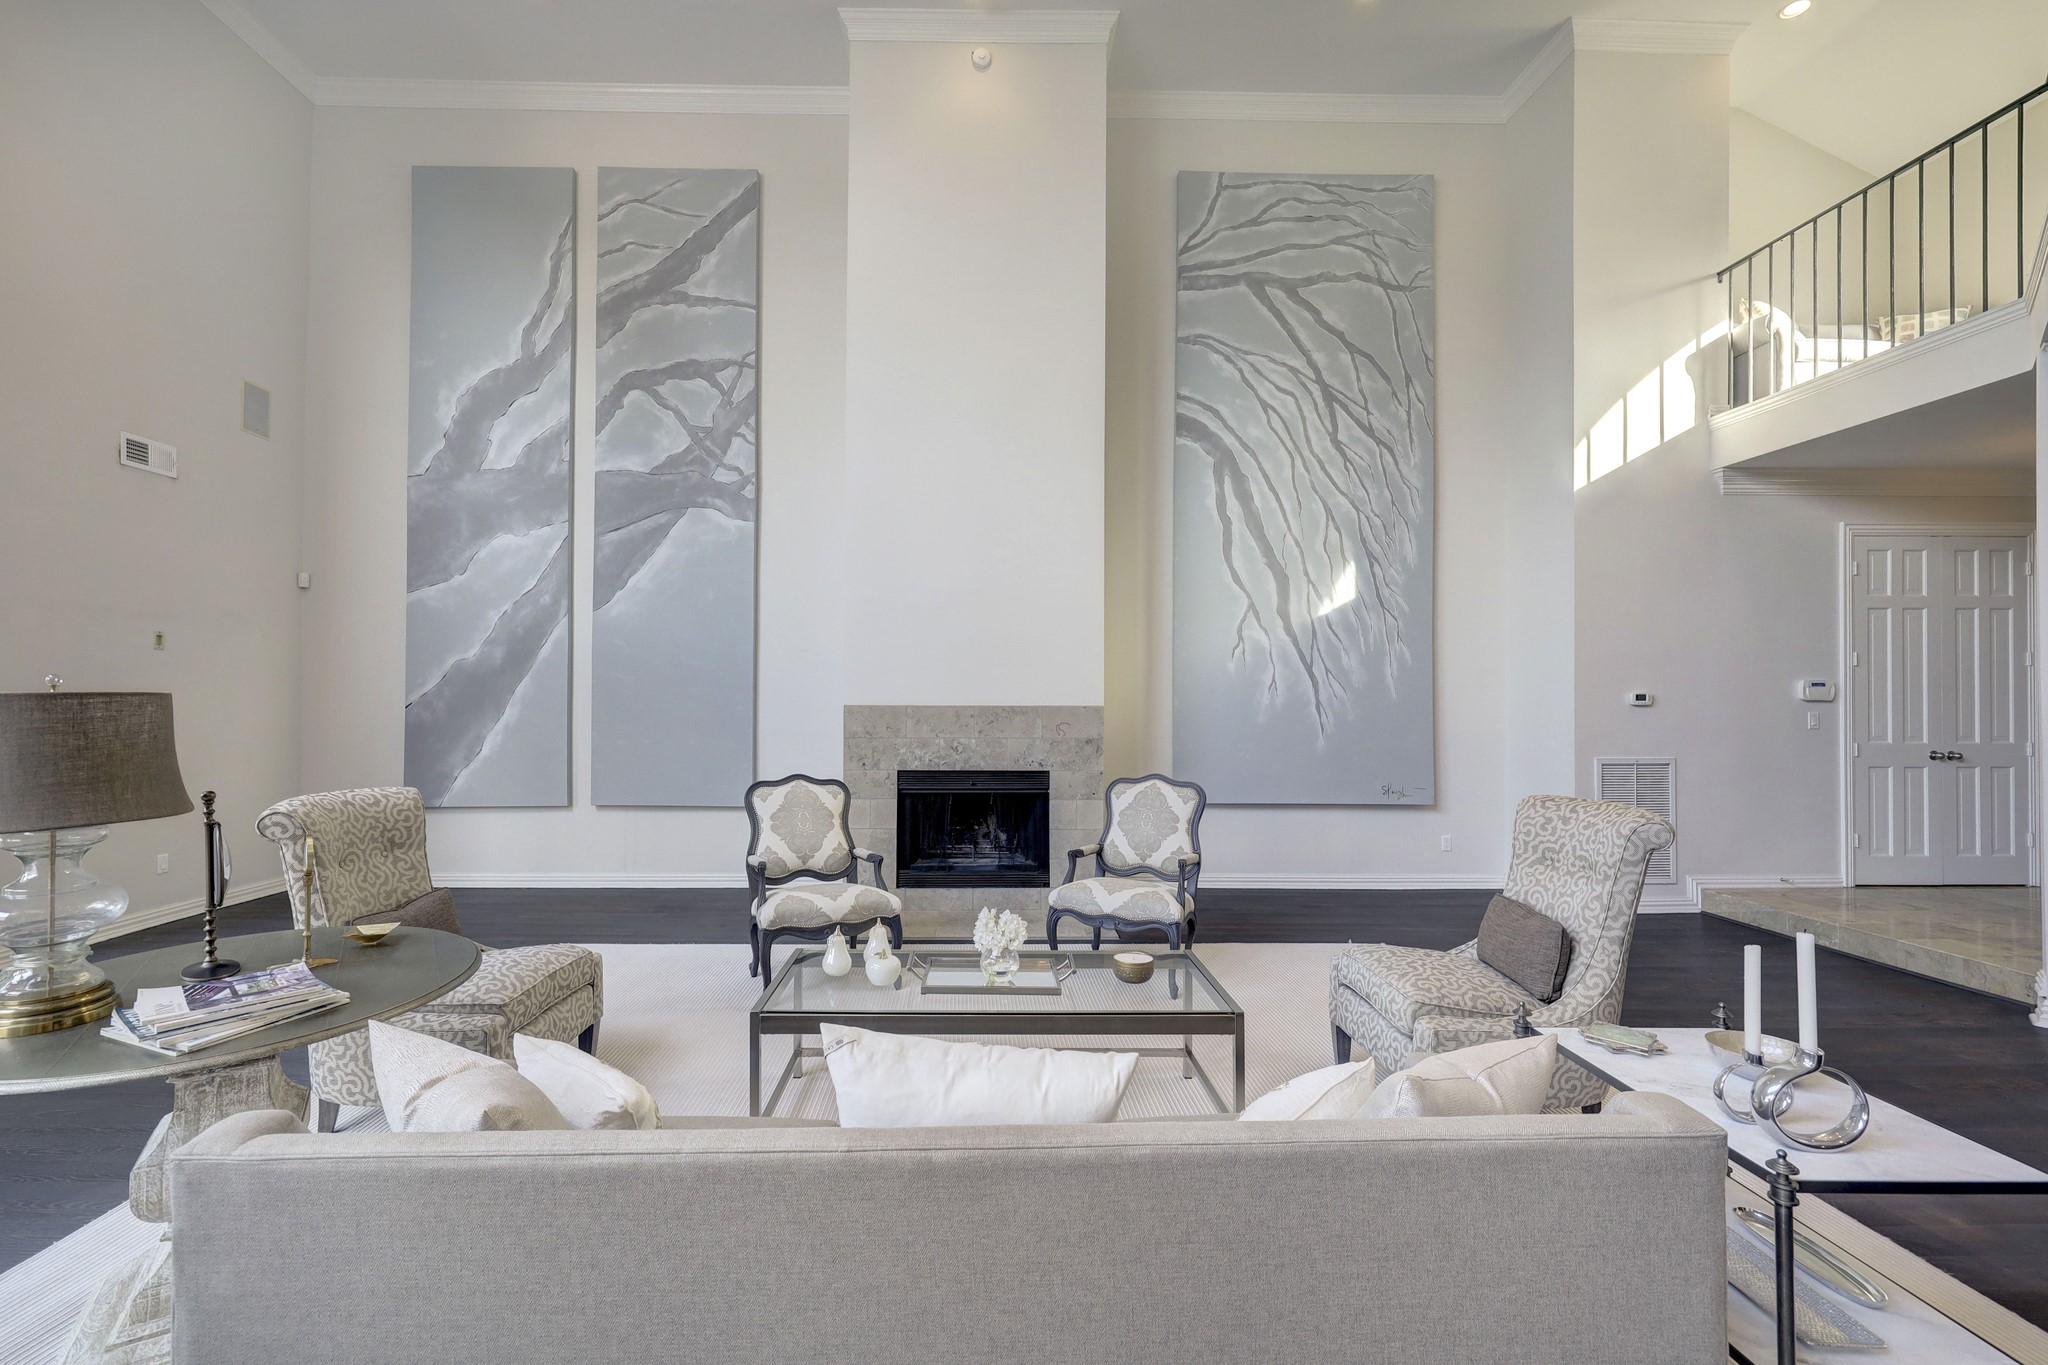 The stunning artwork on both sides of the fireplace will convey with the sale of the home.